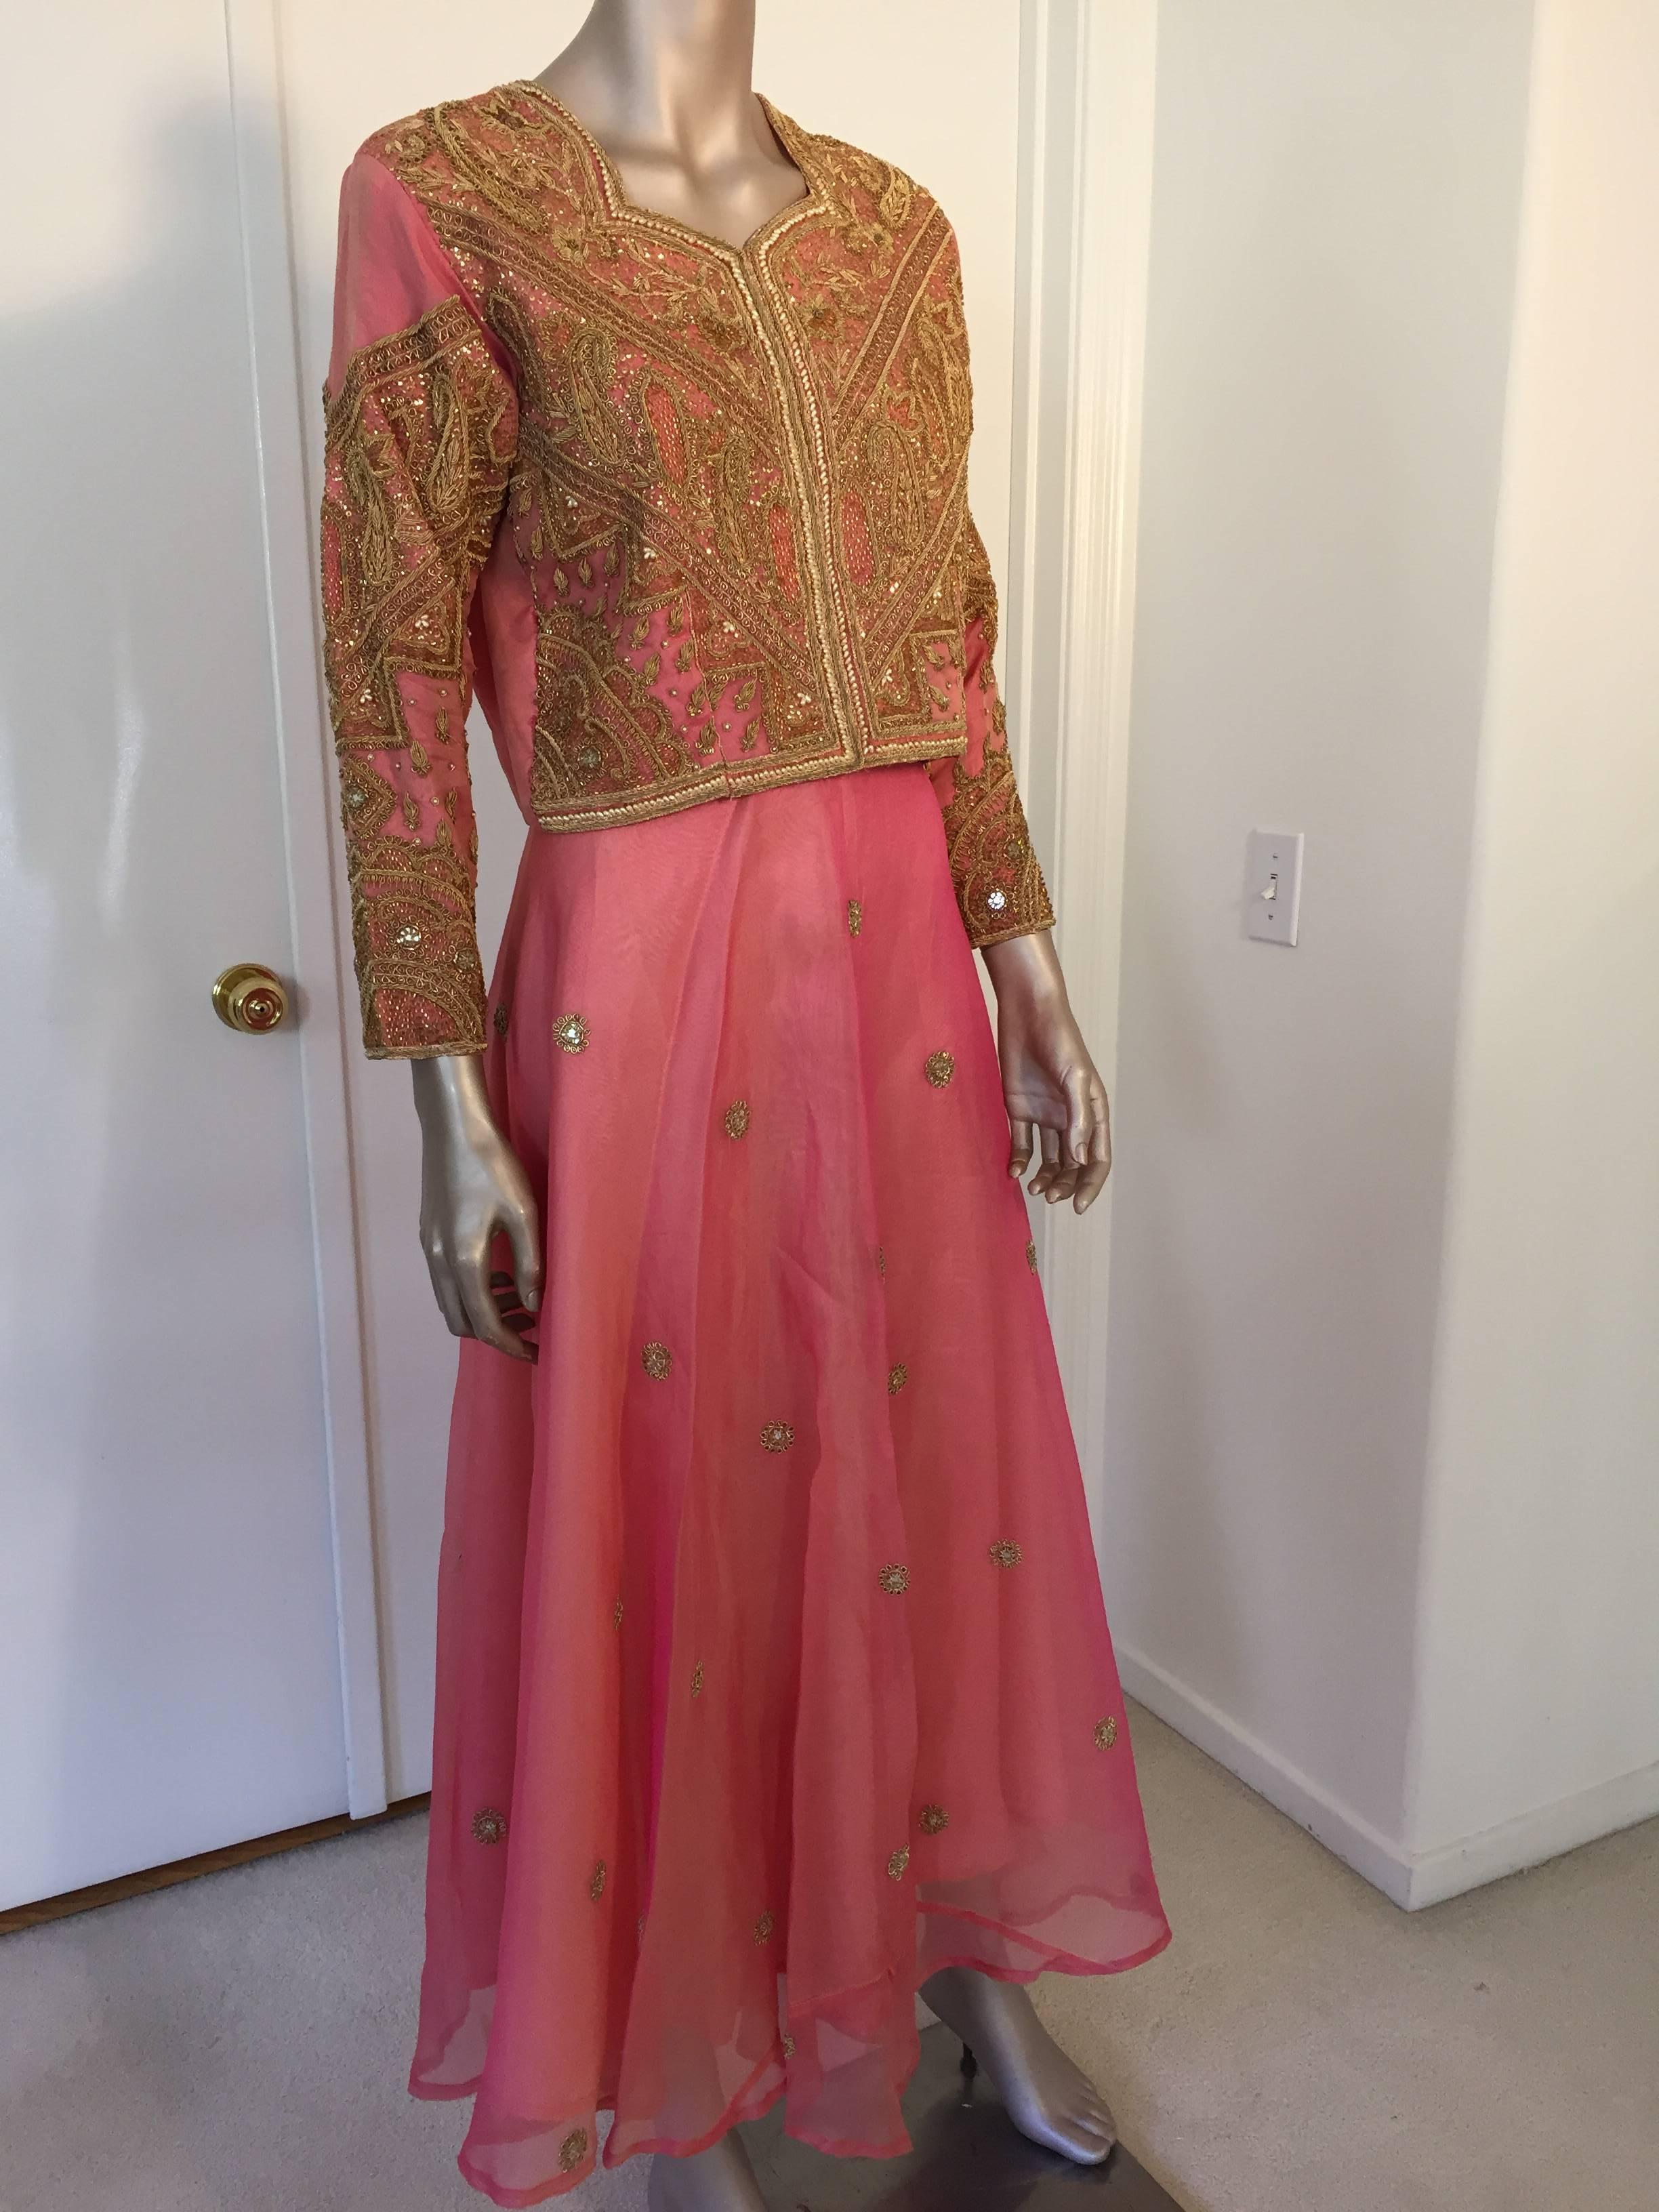 Magnificent 1980s vintage embroidered in gold on pink silk taffeta evening 3 pieces gown, vest, skirt and matching shawl.
The stunning beaded and sequined evening custom made Anglo Raj wedding pink silk taffeta blazer is detailed with gold of micro